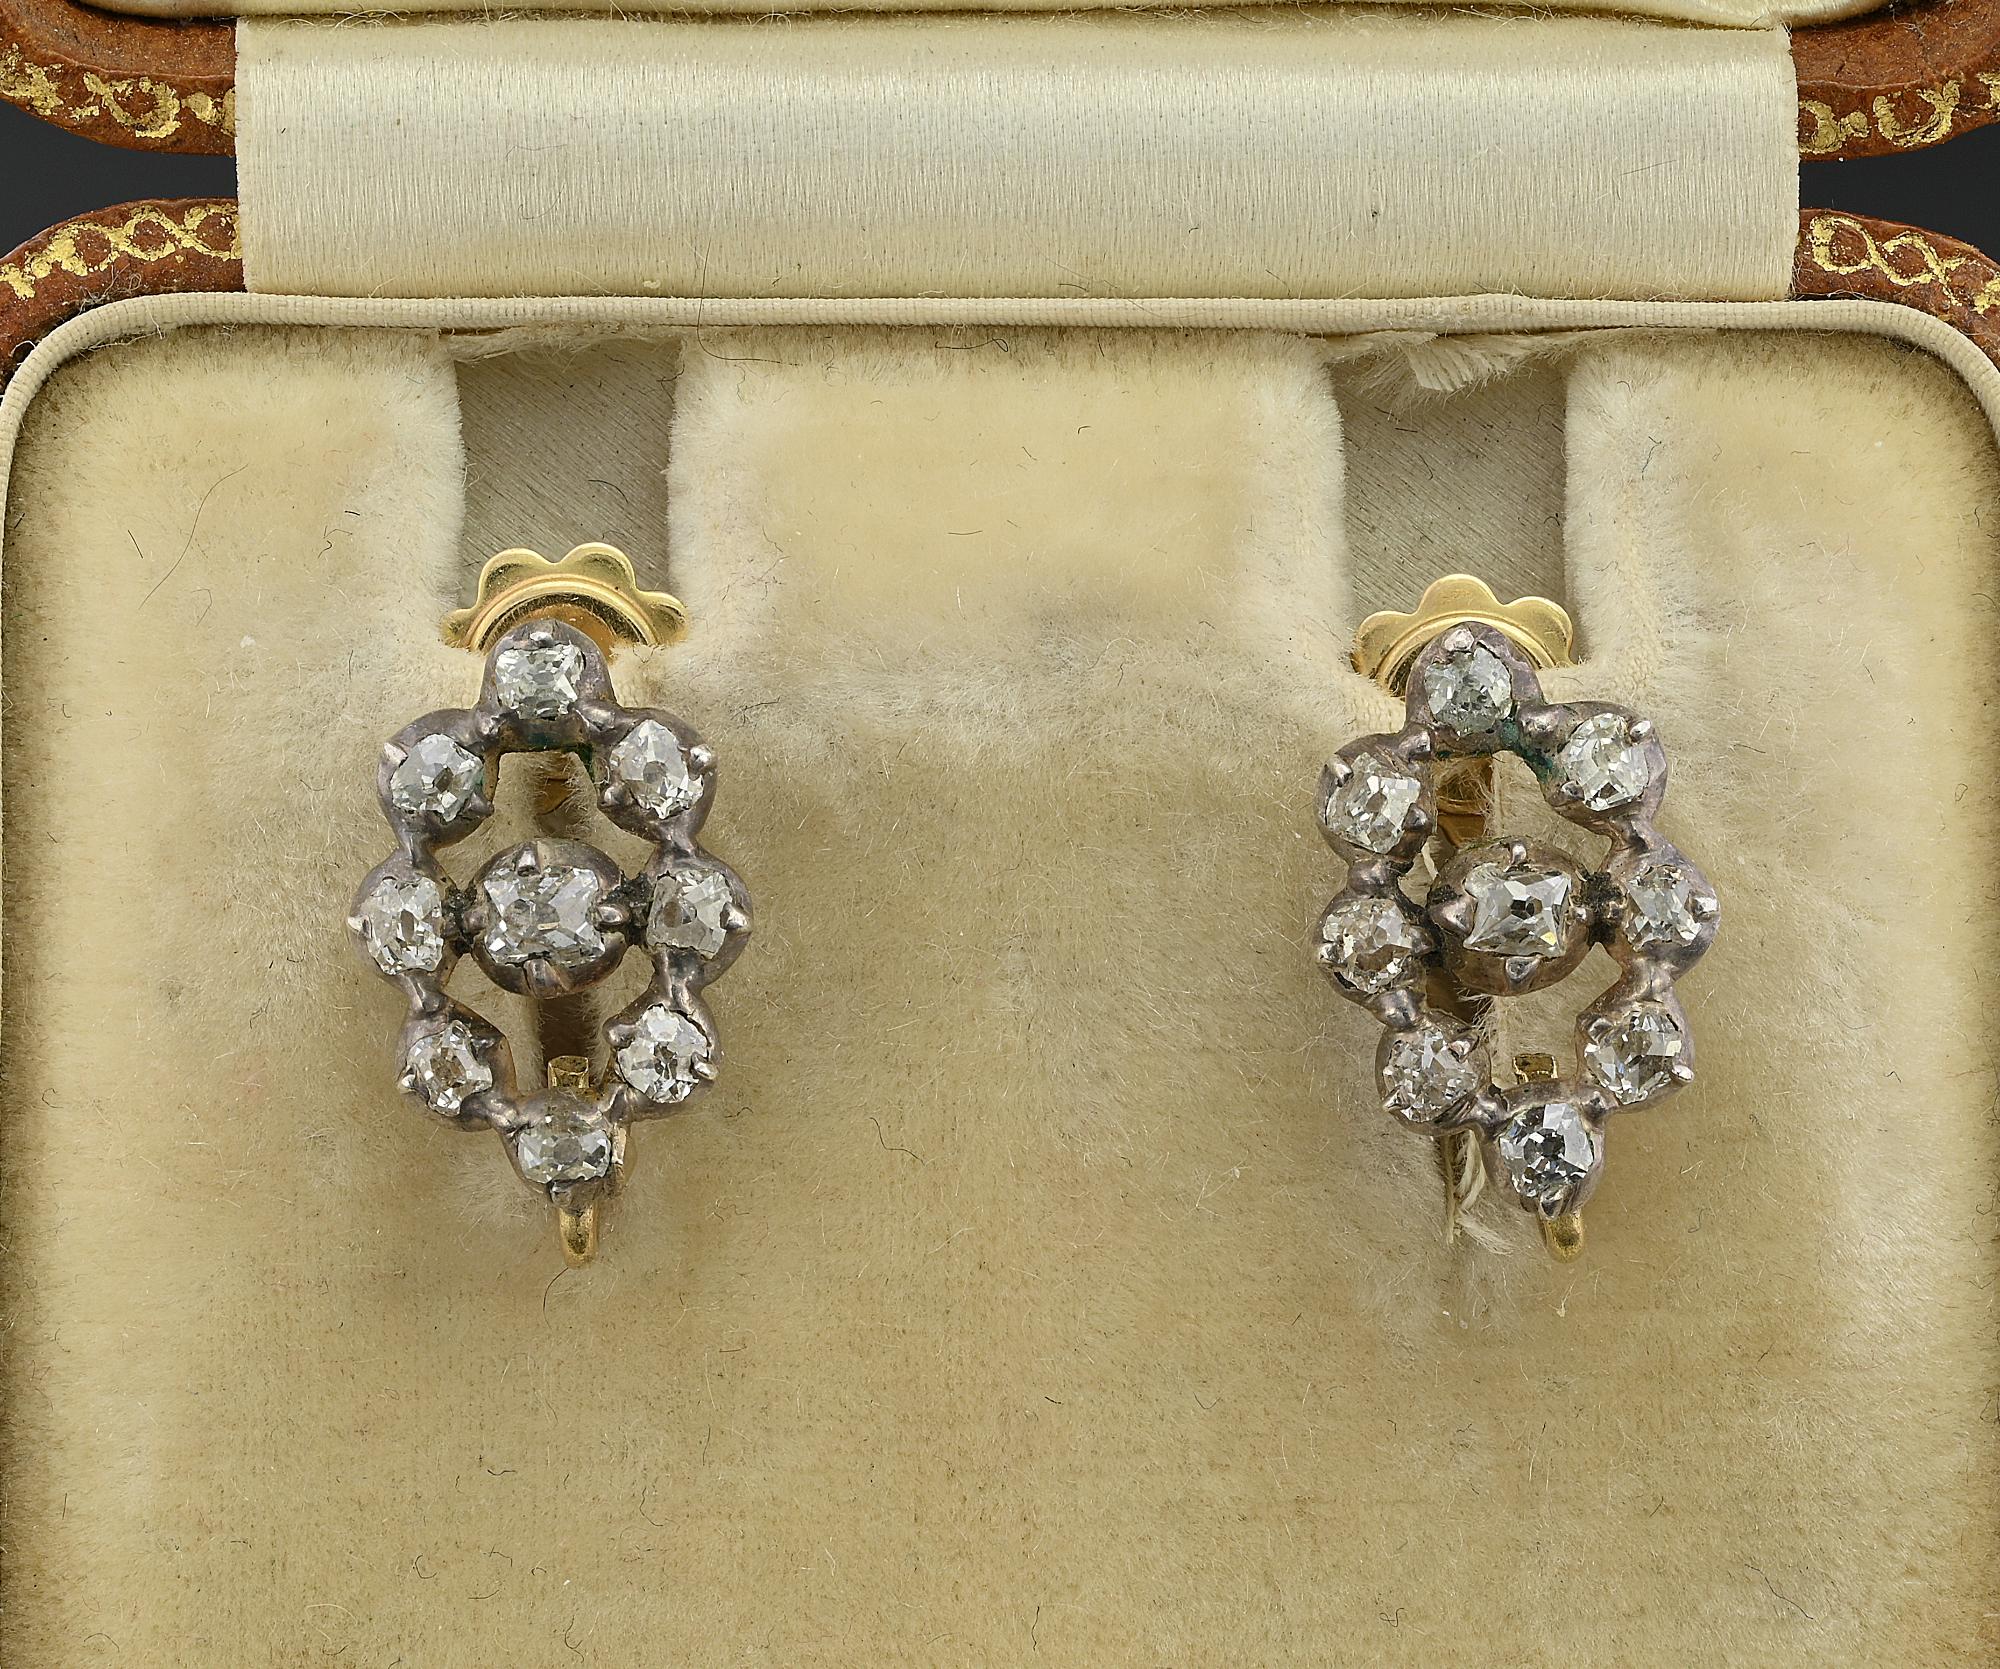 An exceptional Georgian era pair of long drop earrings dating 1800 circa
Hand crafted of silver over solid 15 KT gold except the posts which are a later very old replacement made of solid 18 KT
Fabulous night/day design, top can be removed to use